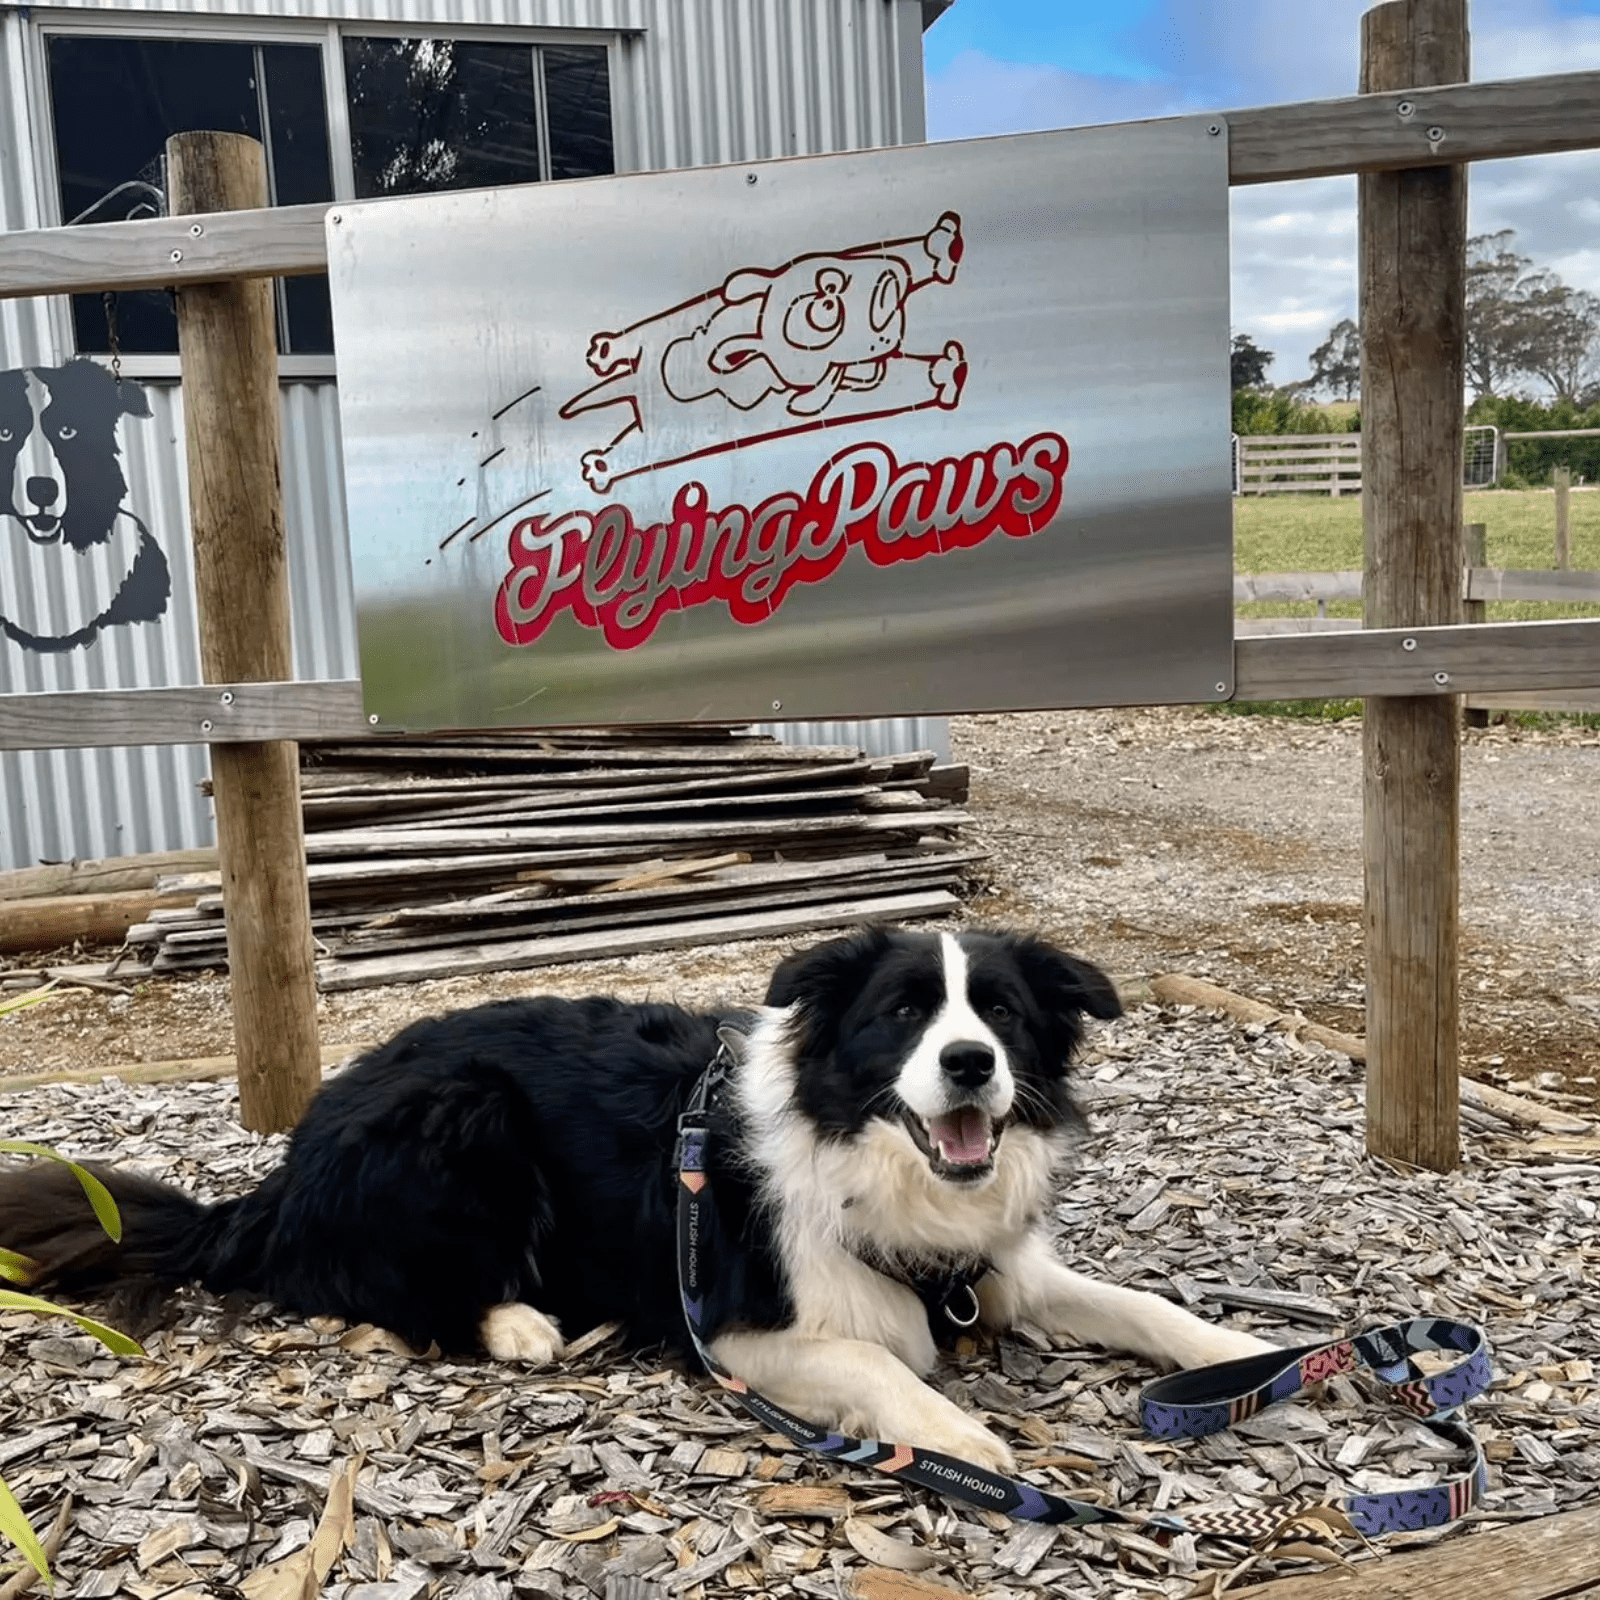 A border collie named Charlie outside laying in front of the Flying Paws sign